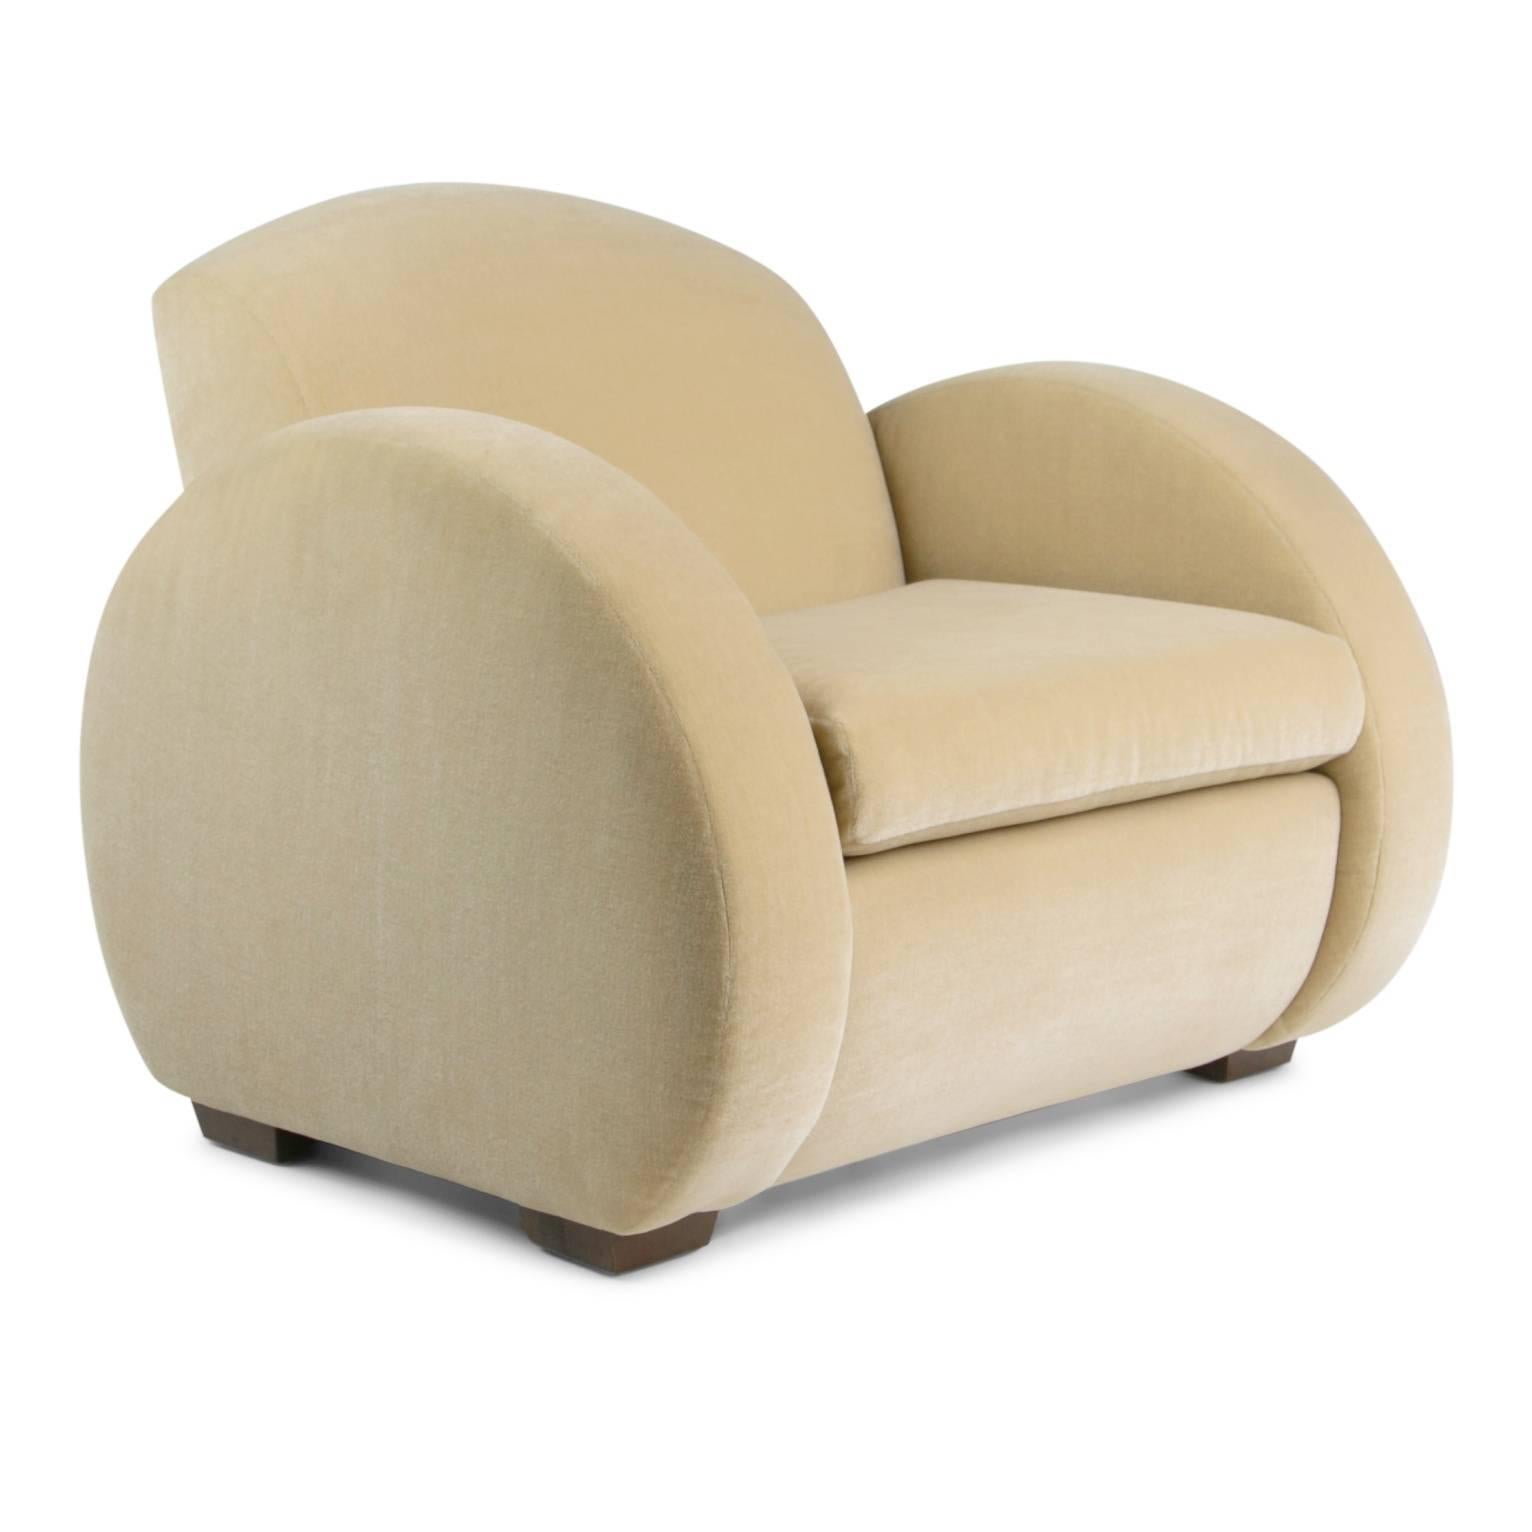 *NOTE* For all items from this dealer, please click VIEW ALL FROM SELLER below on this page.

Newly produced custom-made and high-quality Art Deco style armchairs upholstered in a sumptuous high-end tan colored mohair. These deep-seated lounge